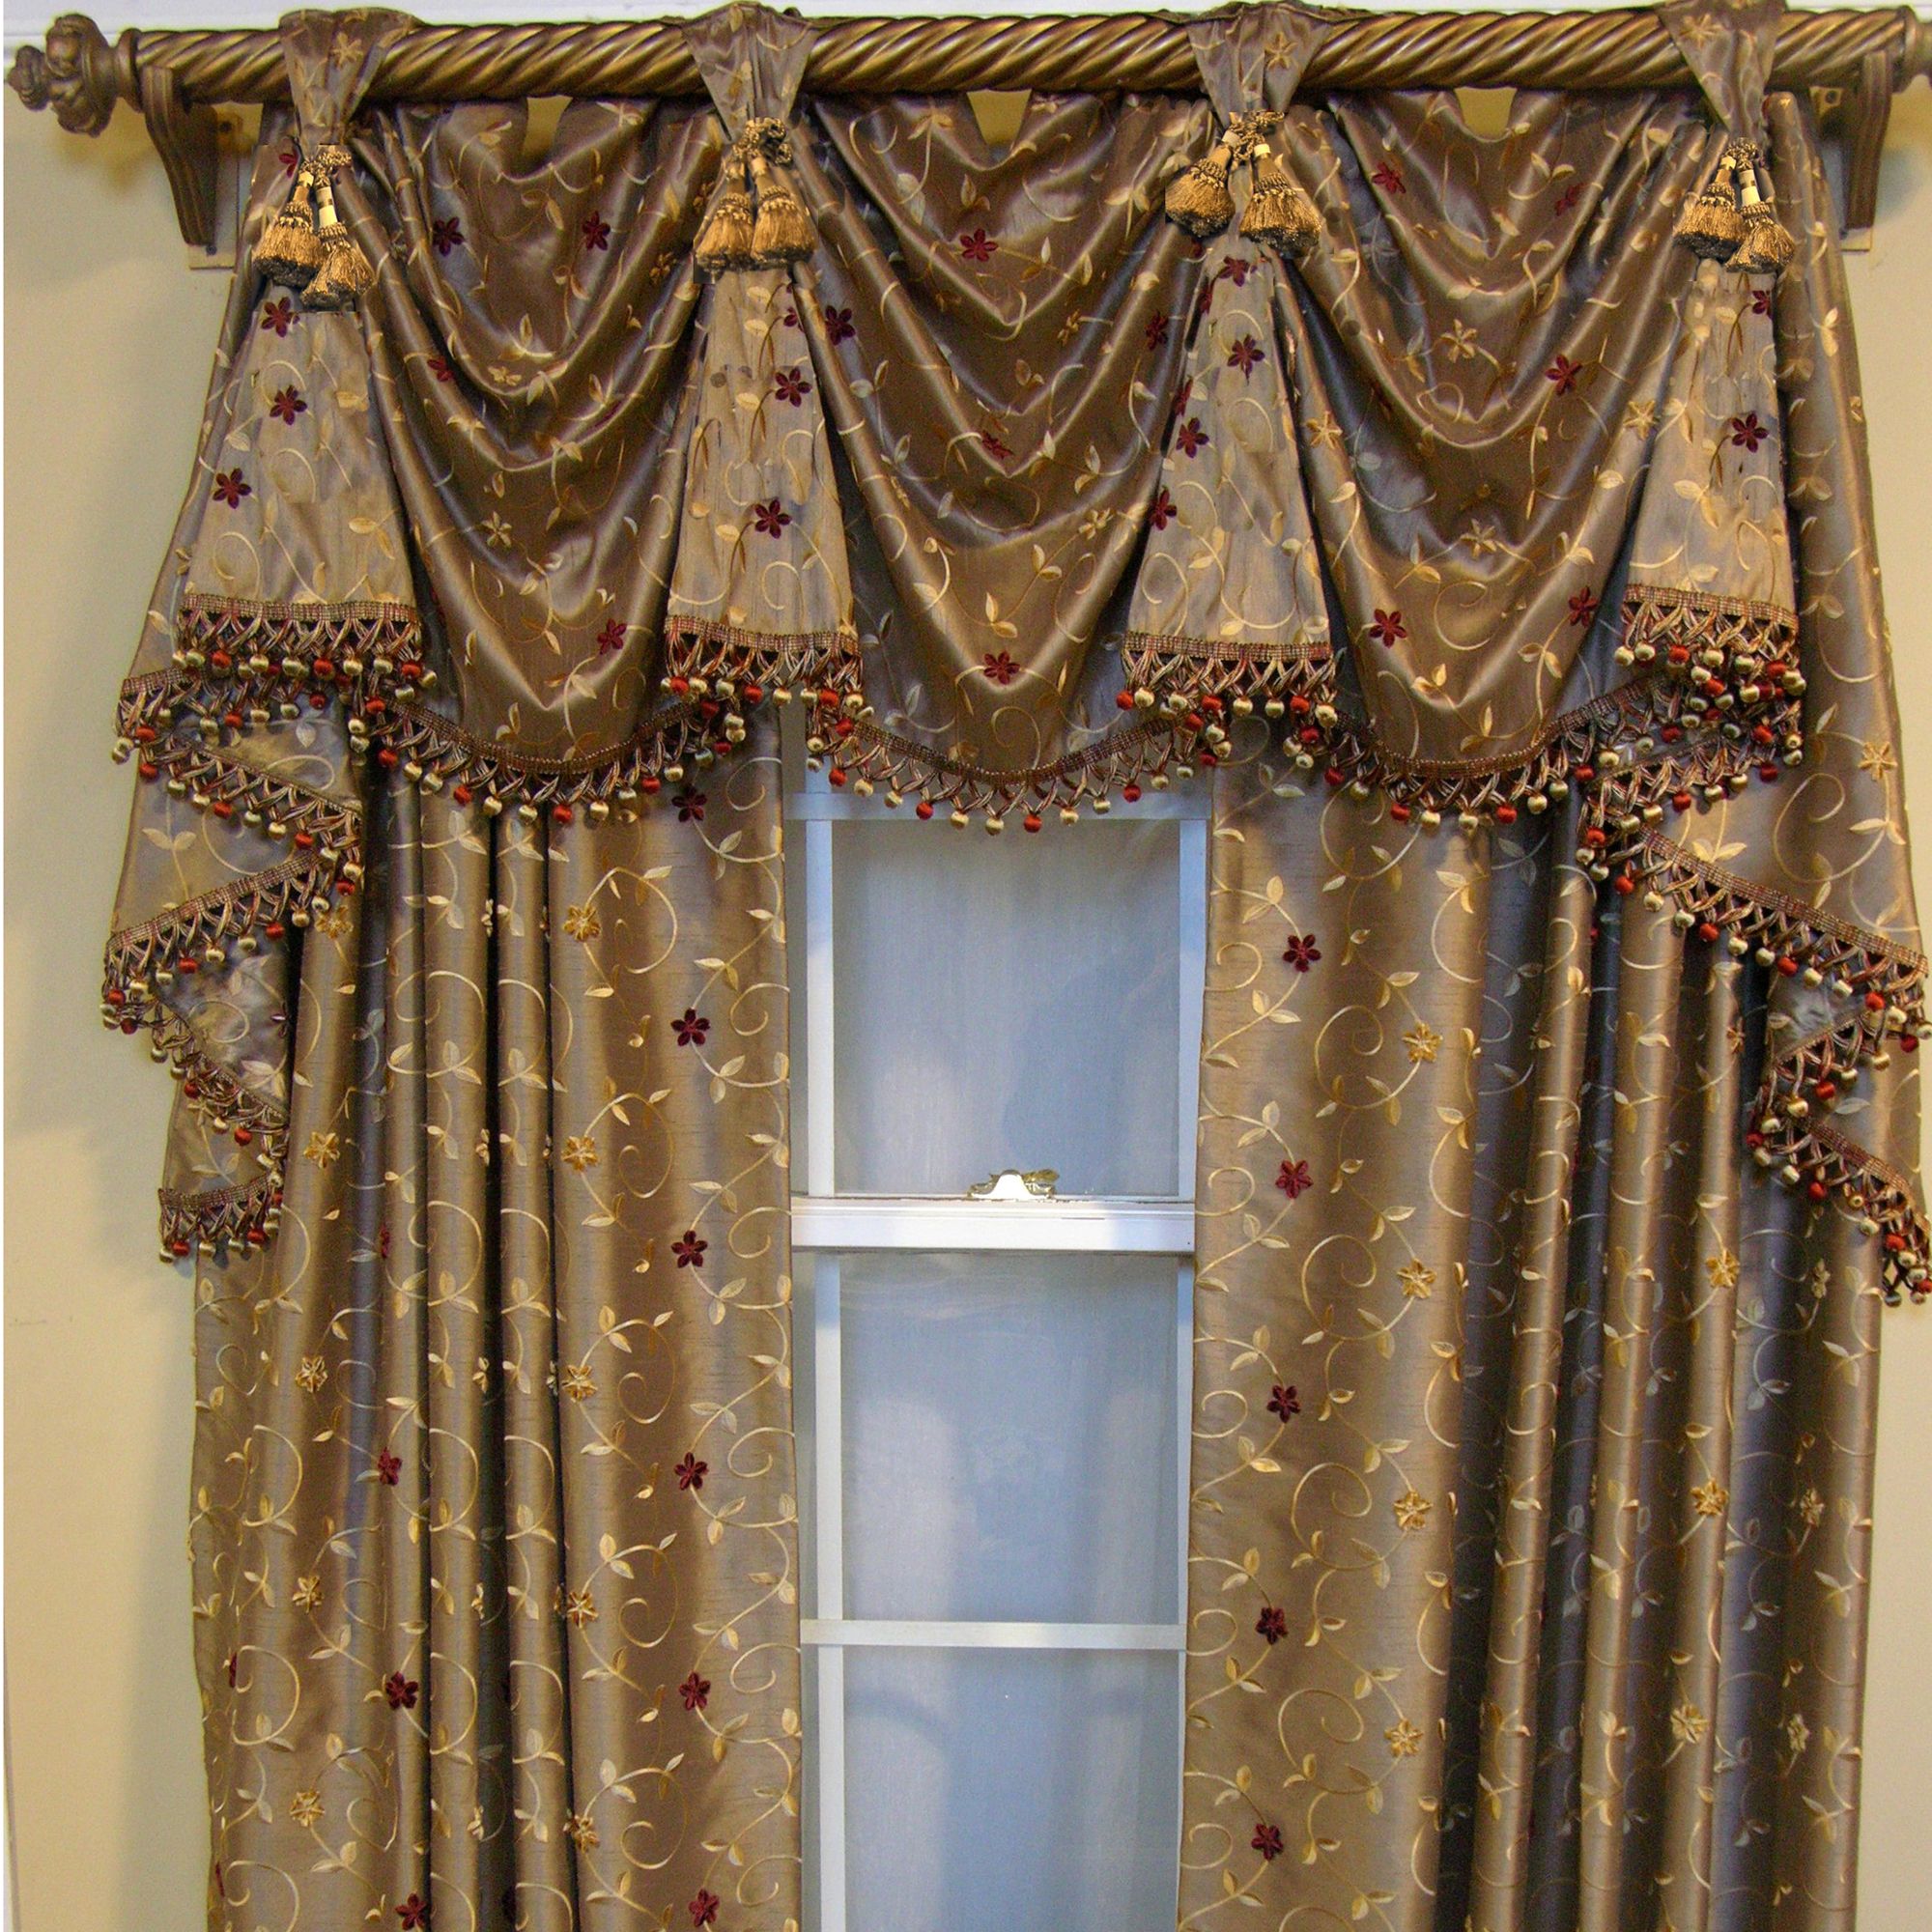 RL Fisher Embroidered Paradise Window Tailored Valance, 54 x 36